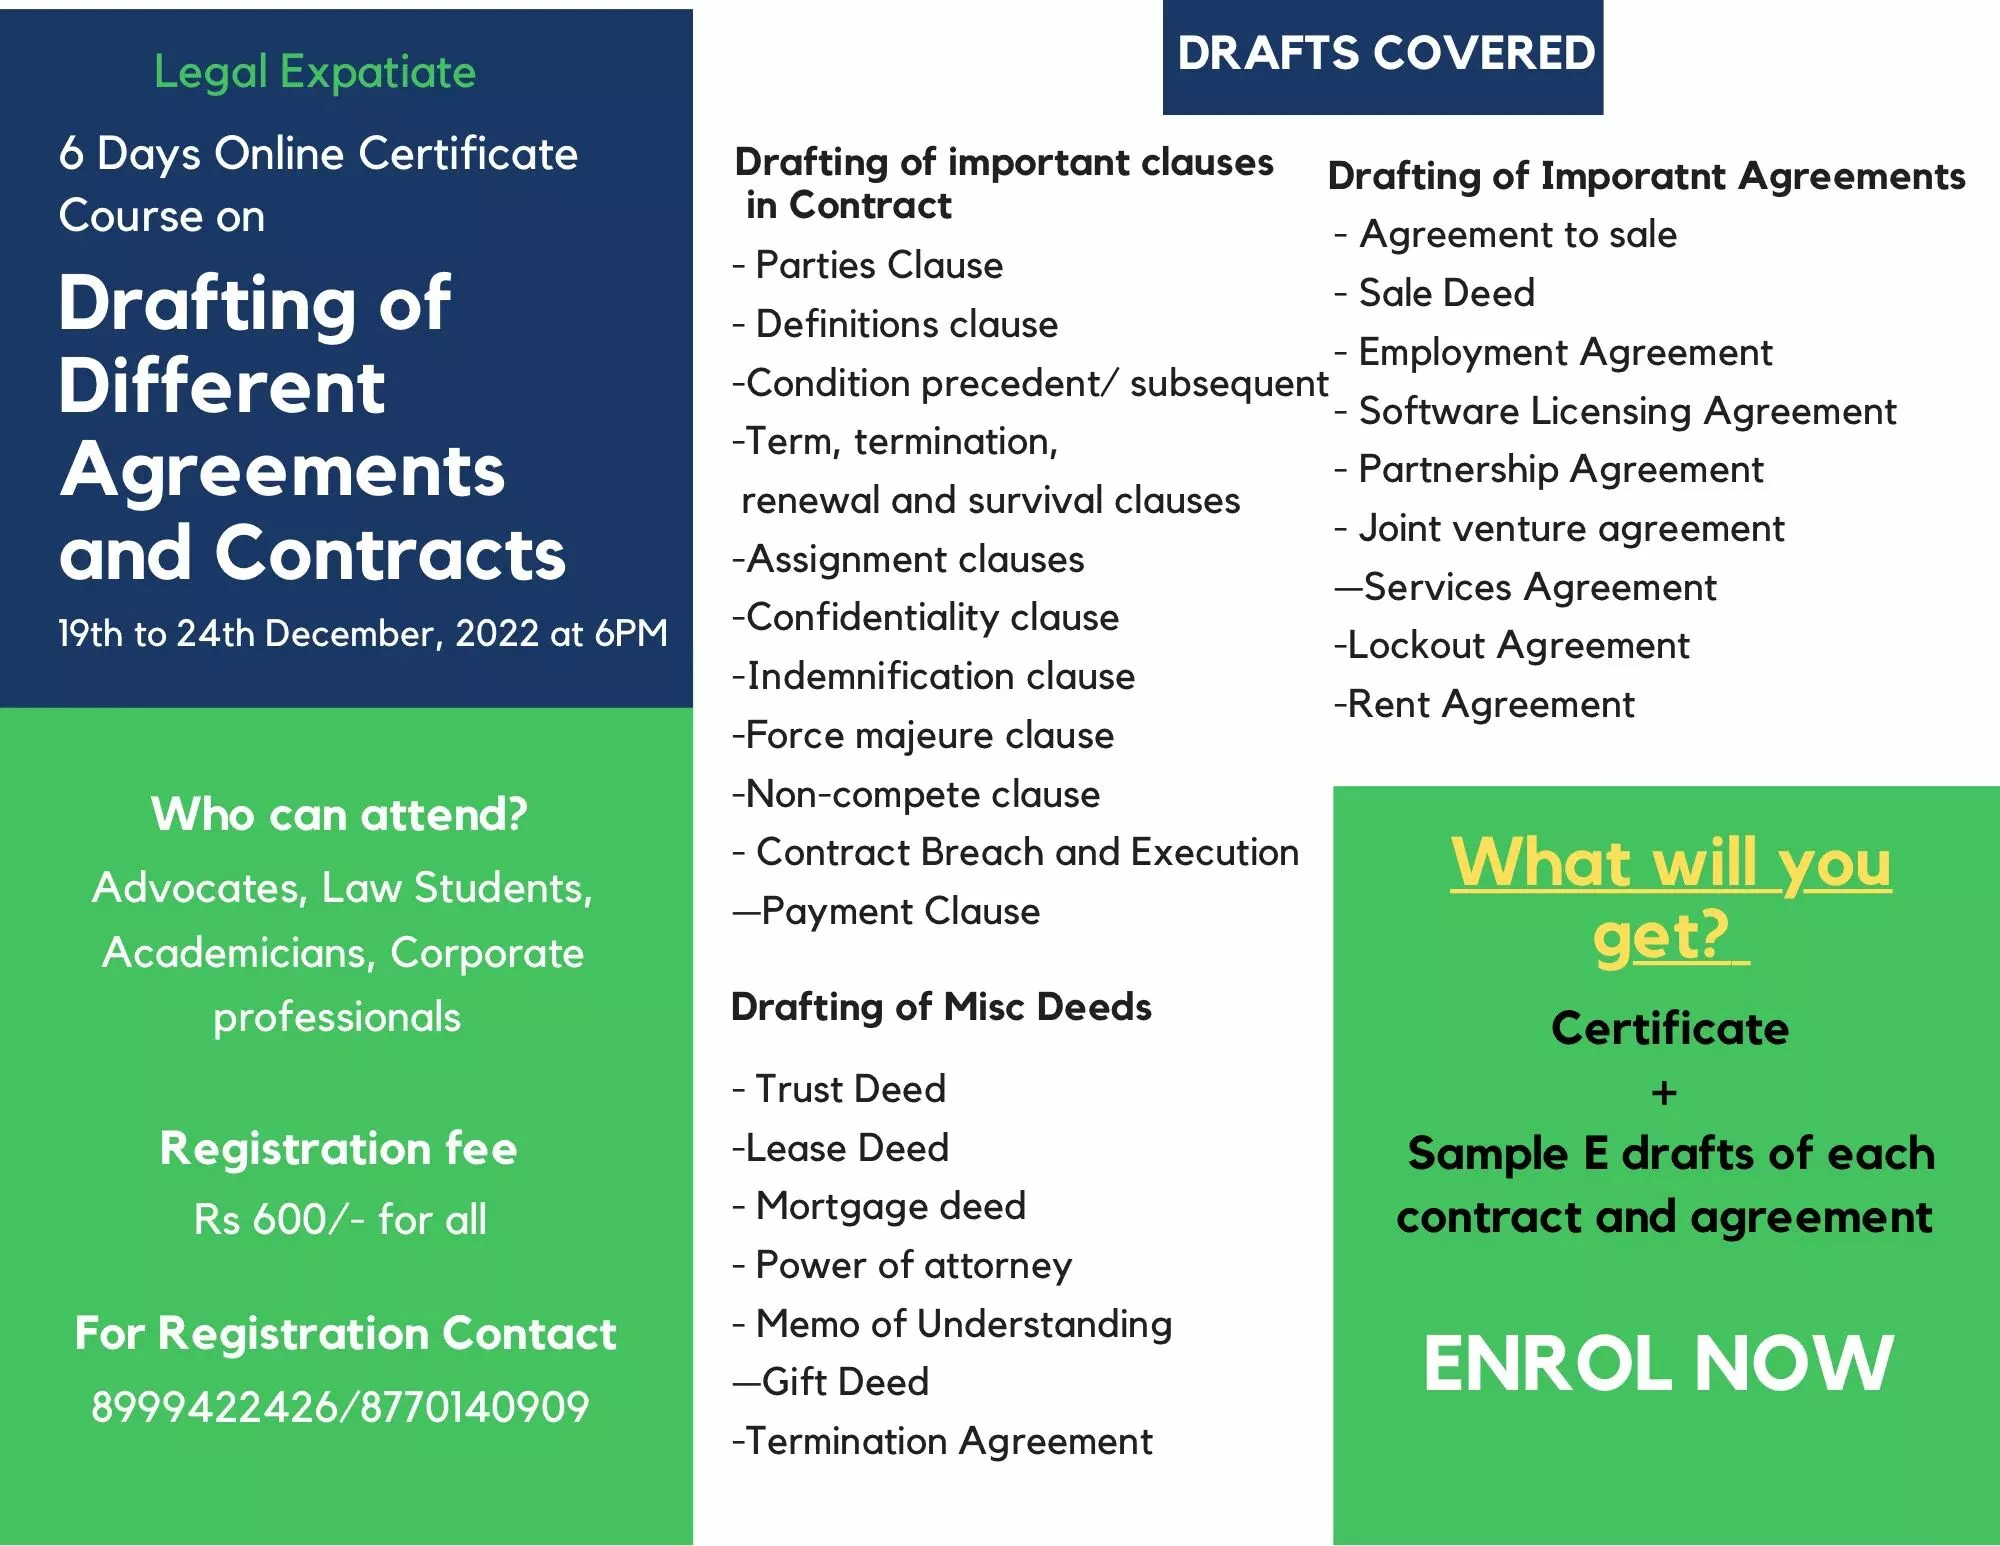 6 Days Online Workshop on Drafting of Agreements And Contracts from 19th to 24th Dec, 2022 | Legal Expatiate